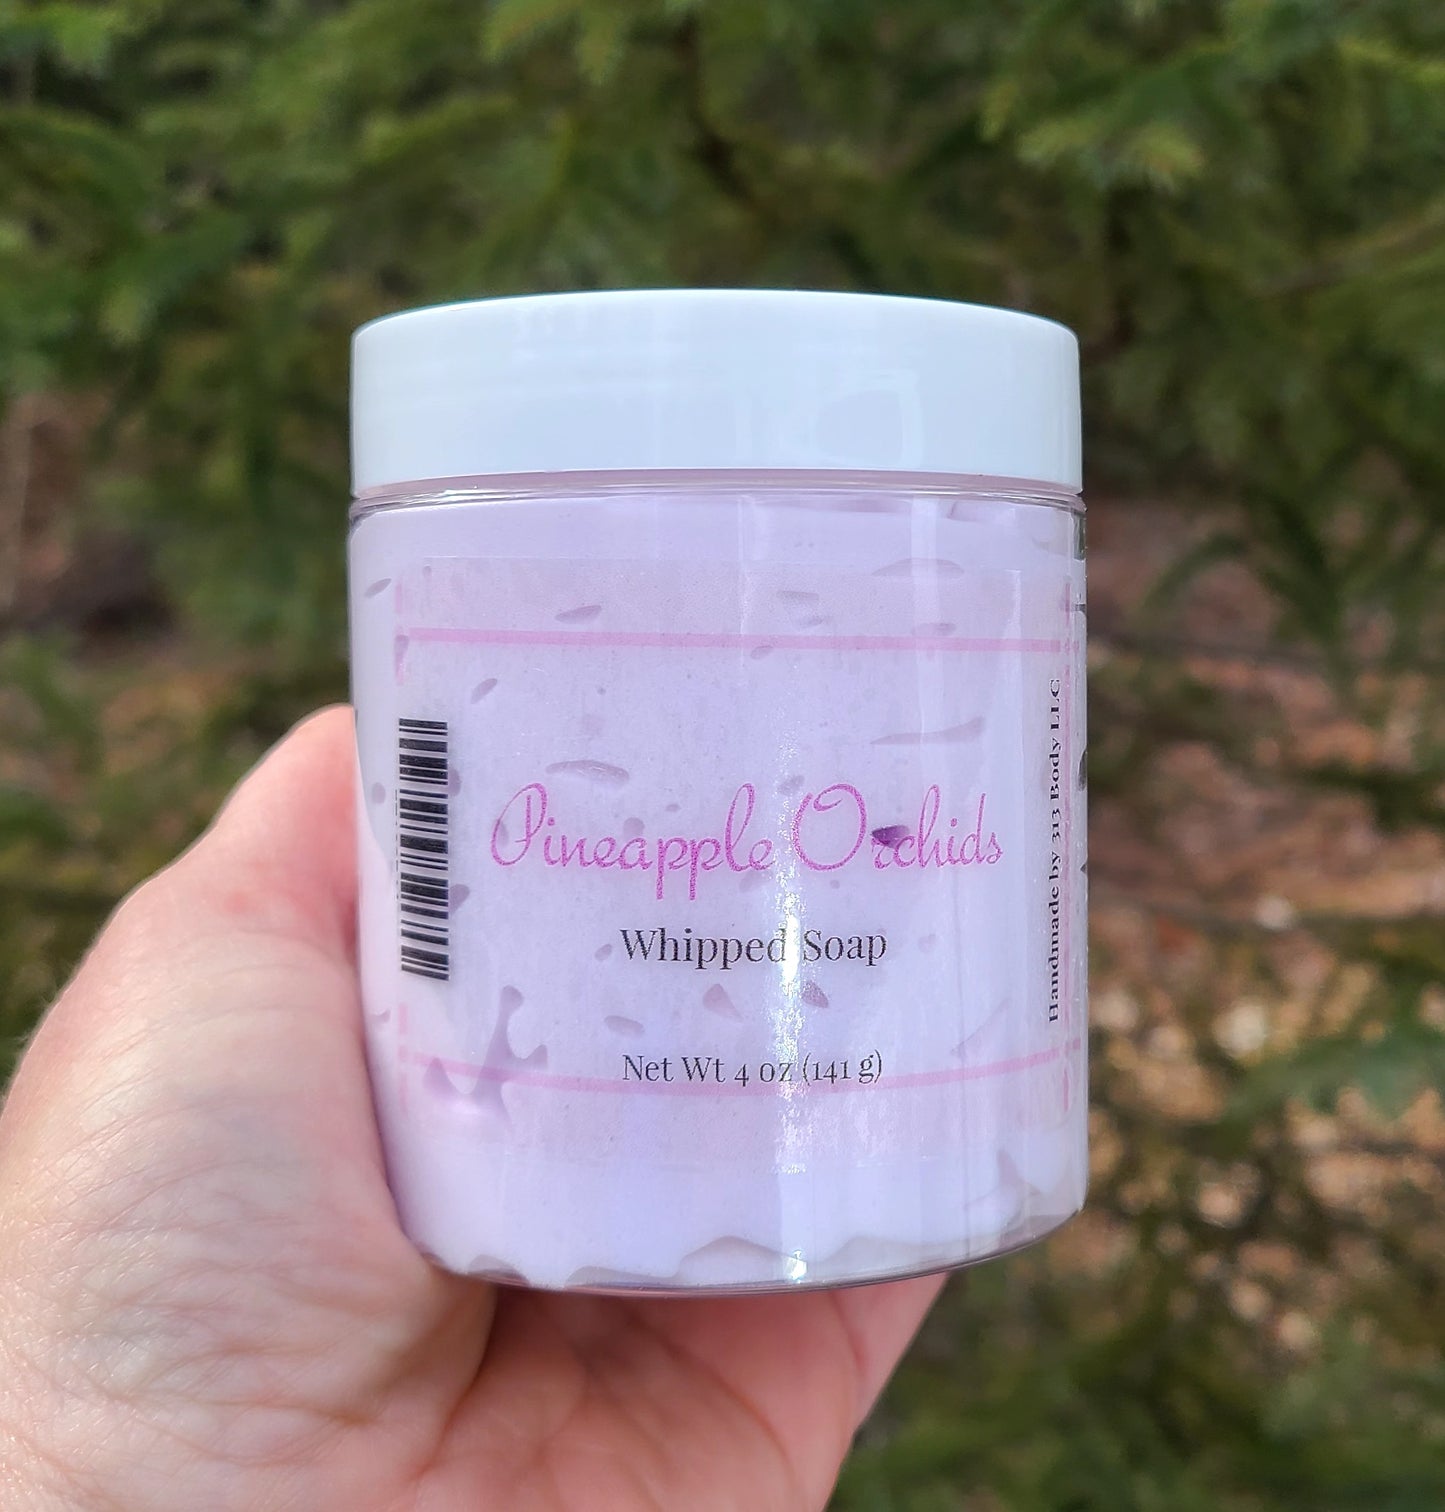 Pineapple Orchid Whipped Soap